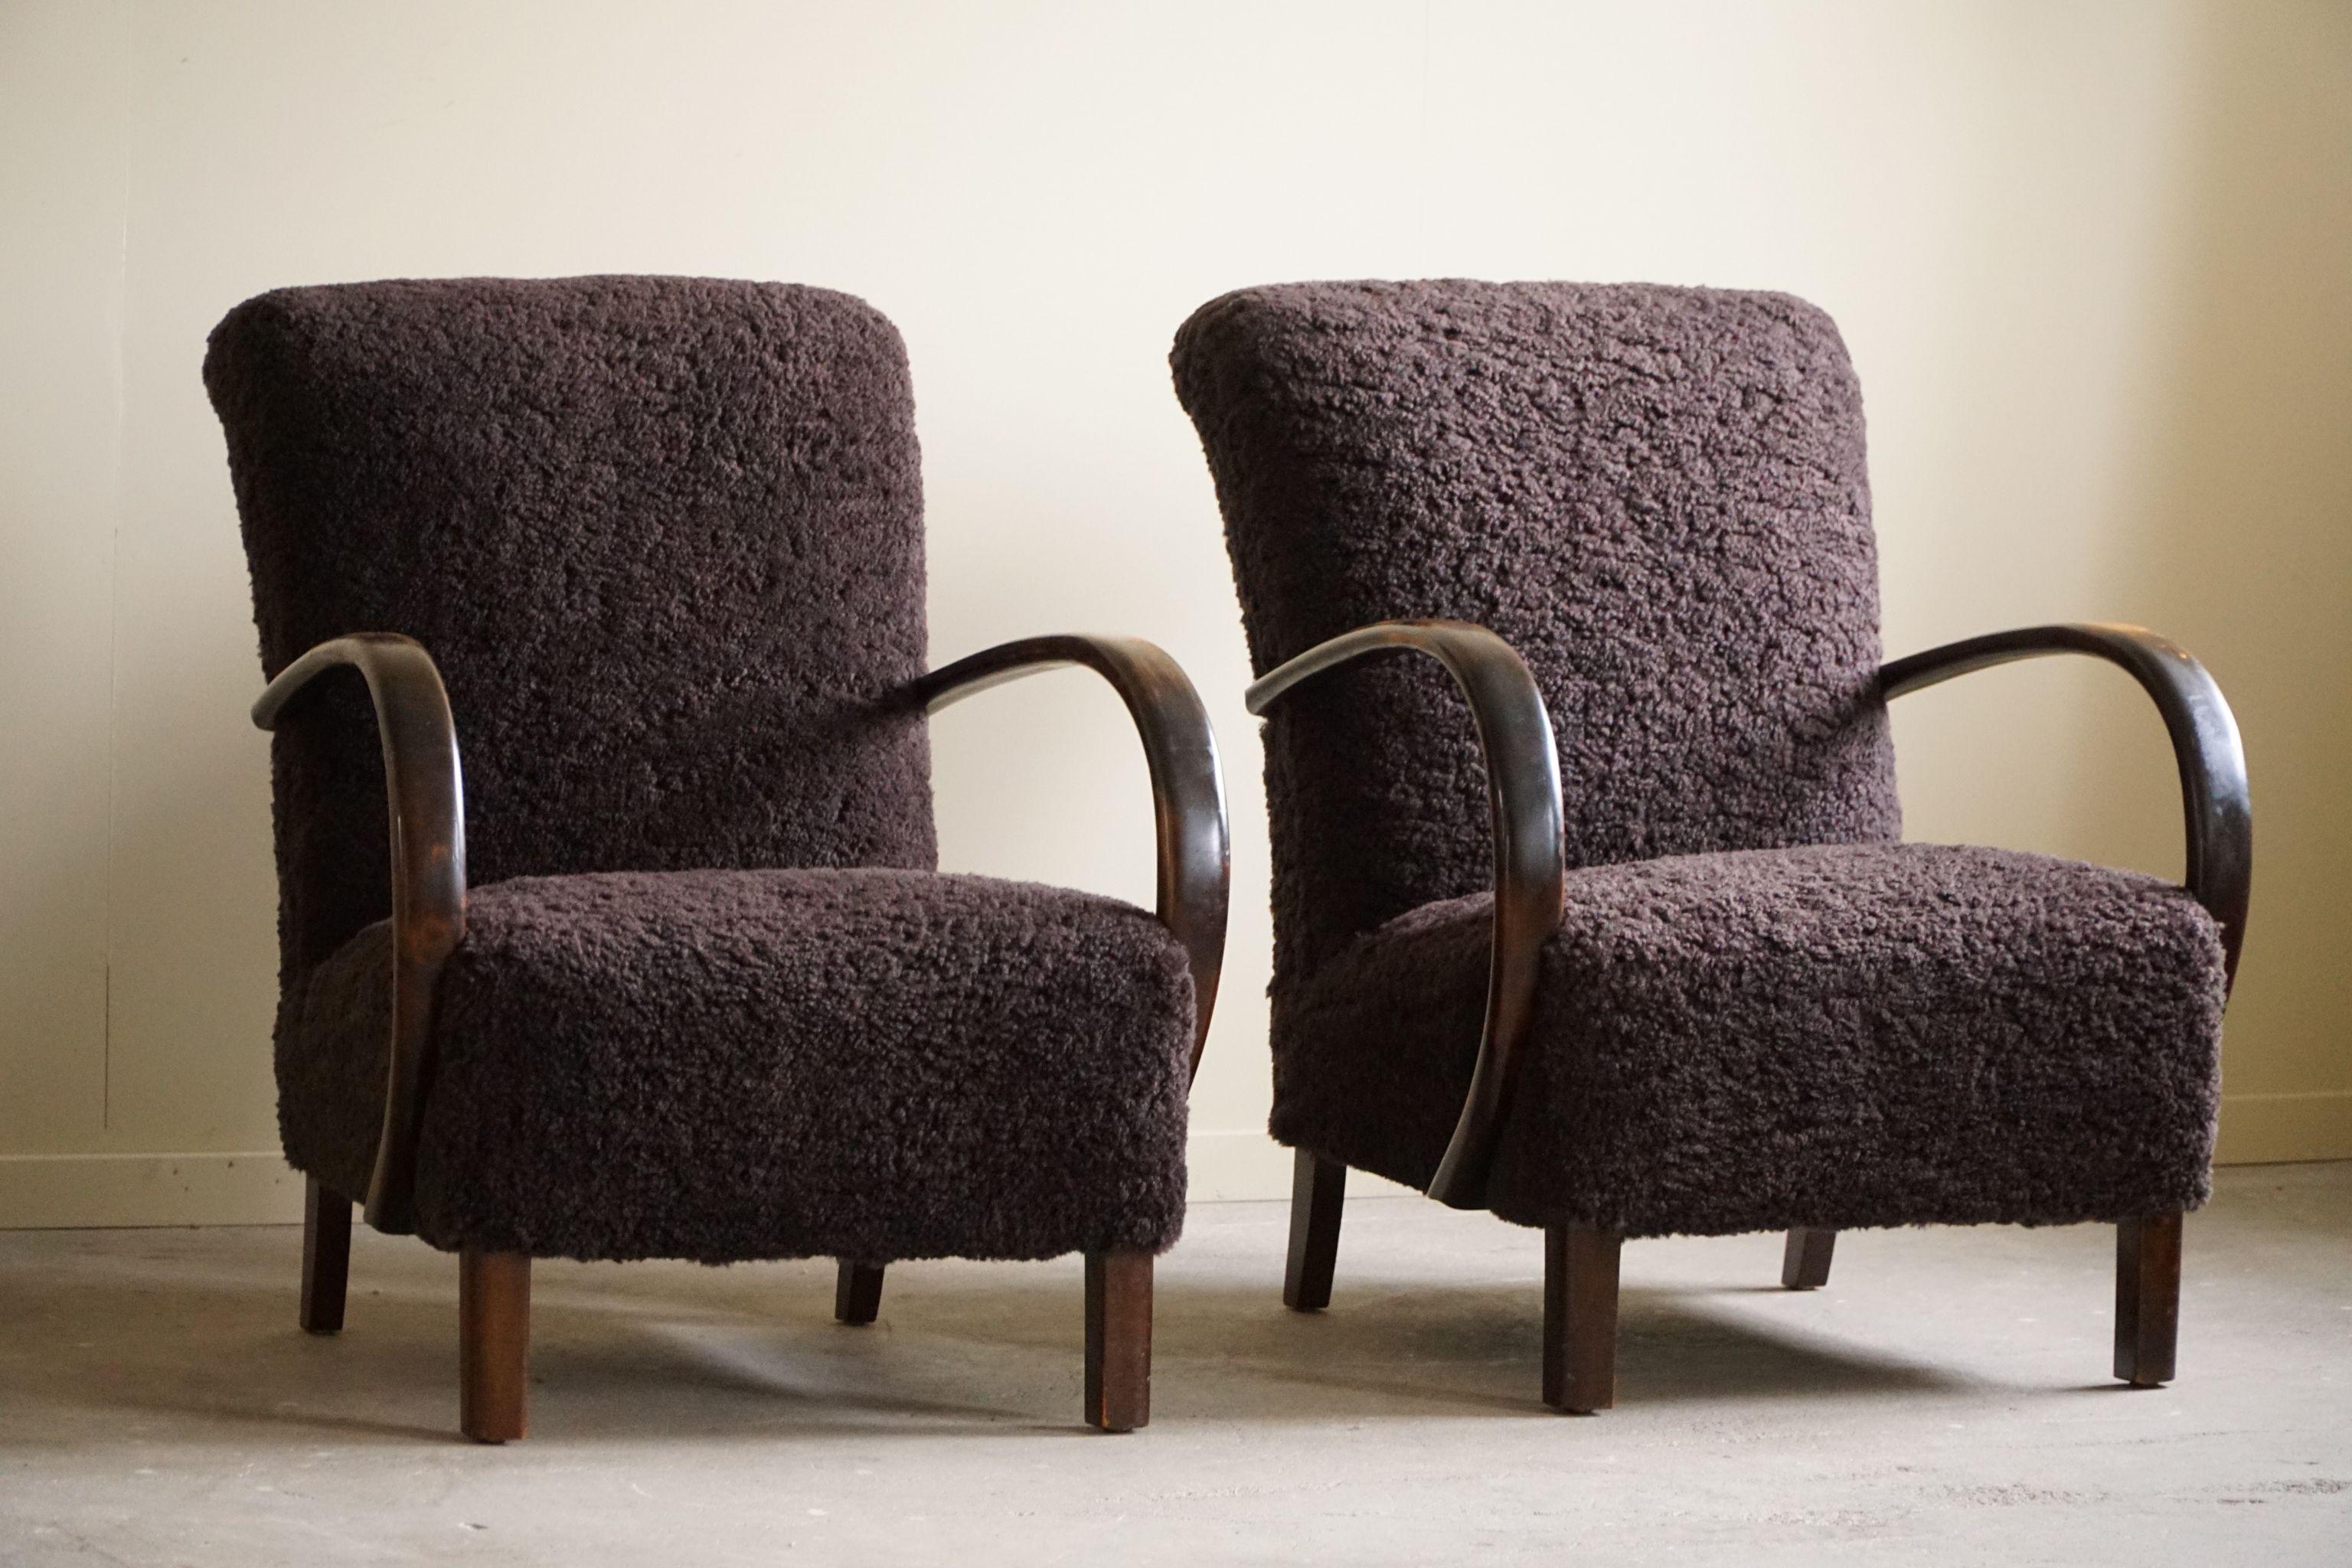 A Pair of Danish Mid Century Modern Lounge Chairs in Beech & Lambswool, 1940s For Sale 11